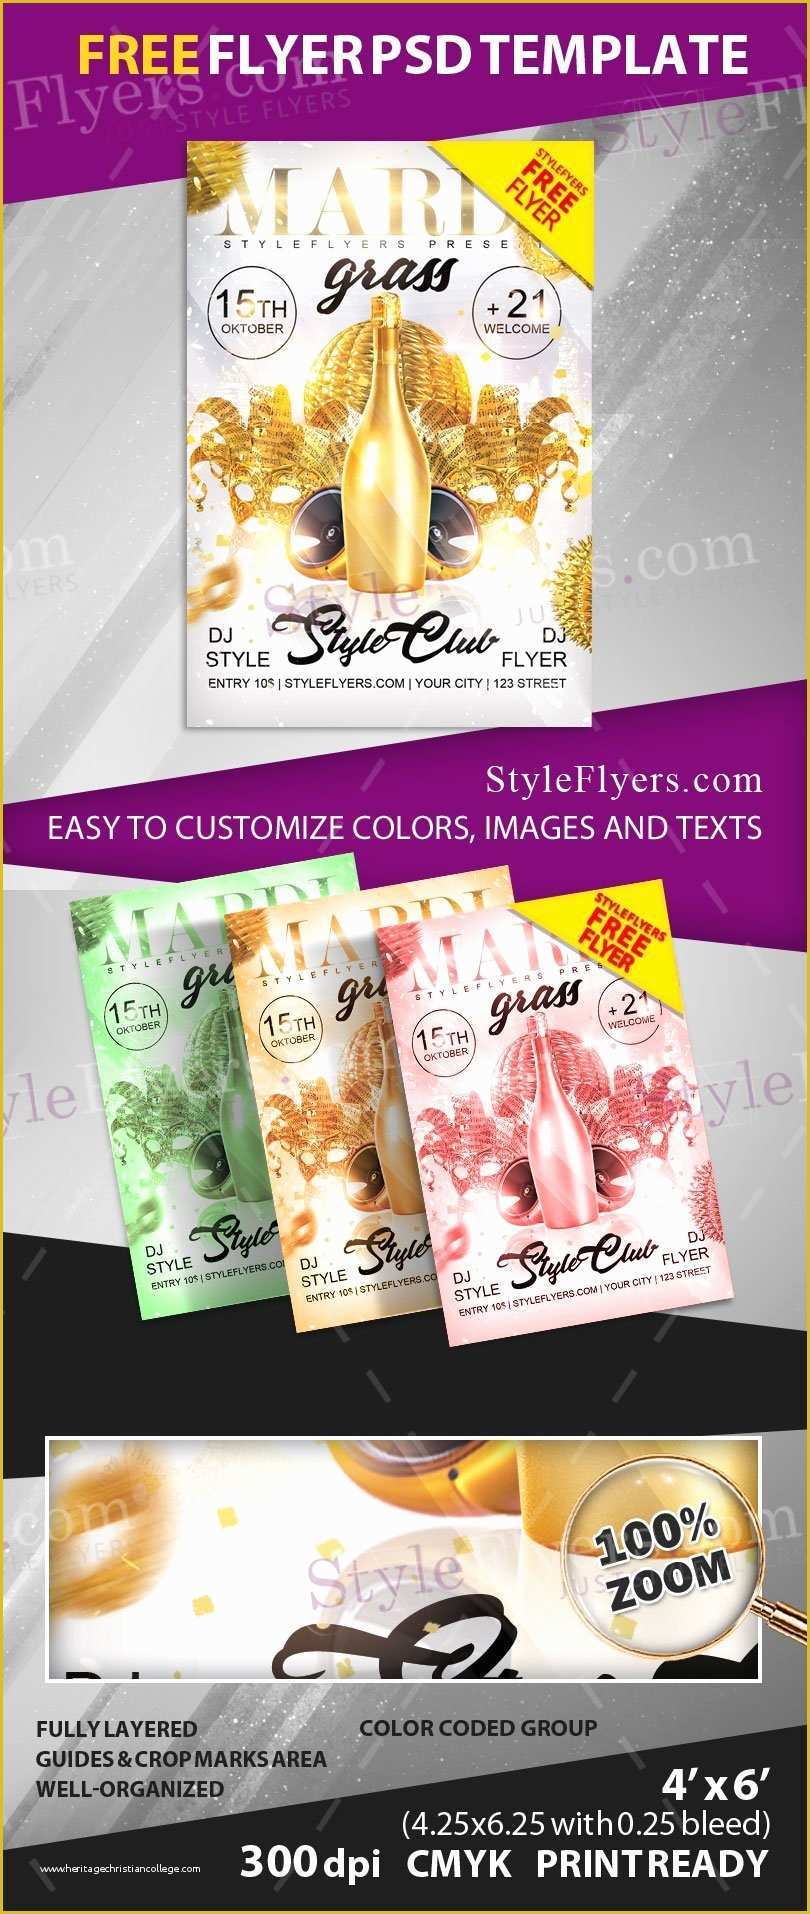 Mardi Gras Flyer Template Free Download Of Mardi Gras Free Psd Flyer Template Free Download